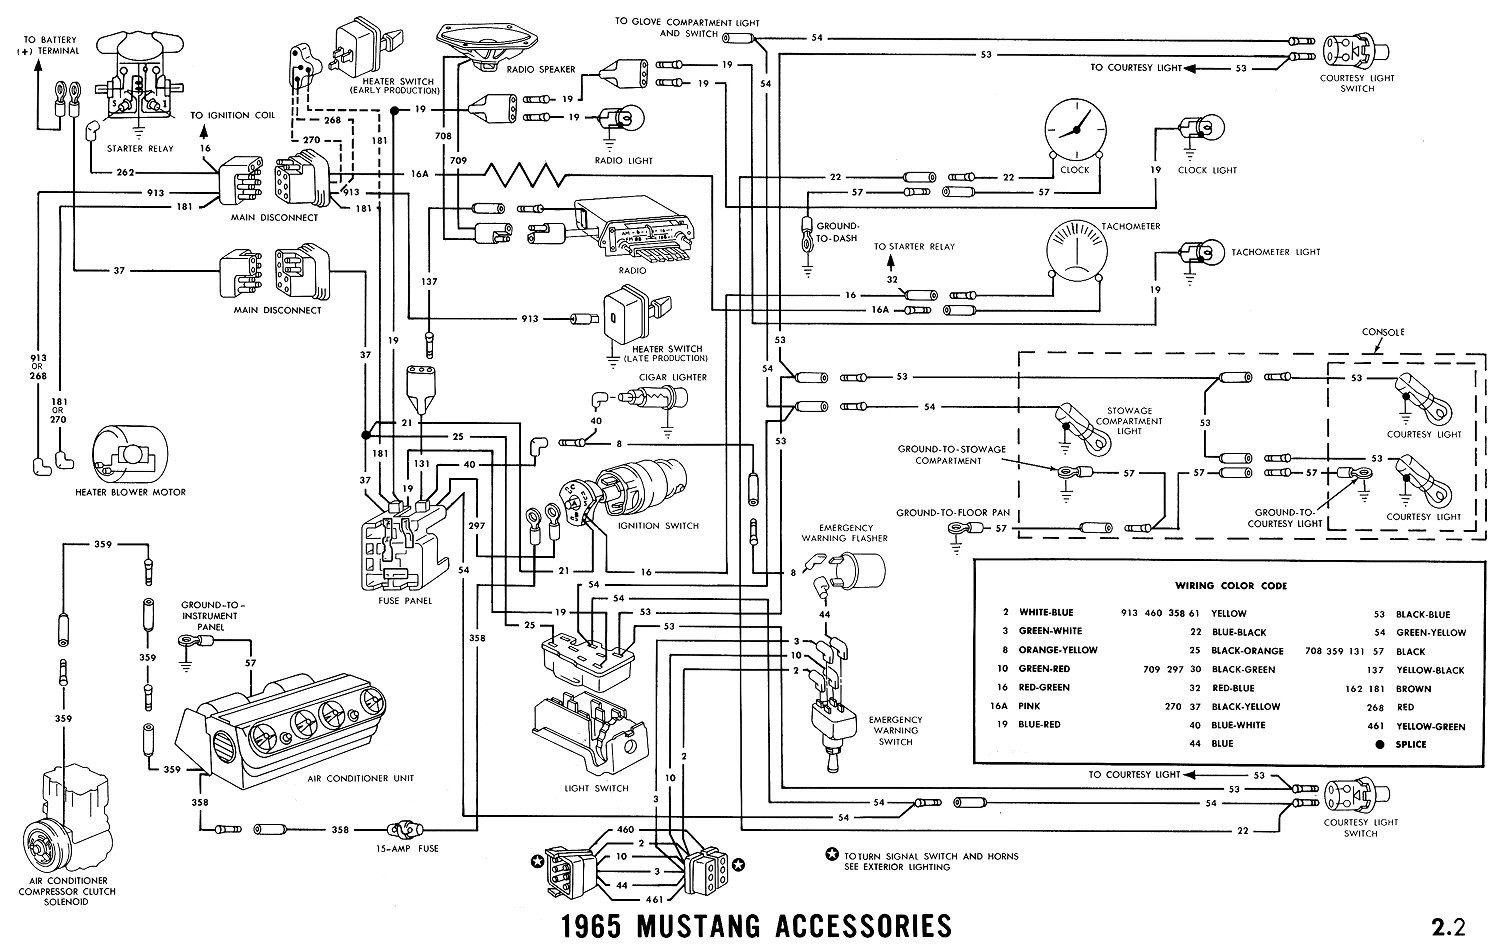 1969 ford mustang wiring diagram on 69 mustang wiring diagram free rh hitch co 1969 Mustang